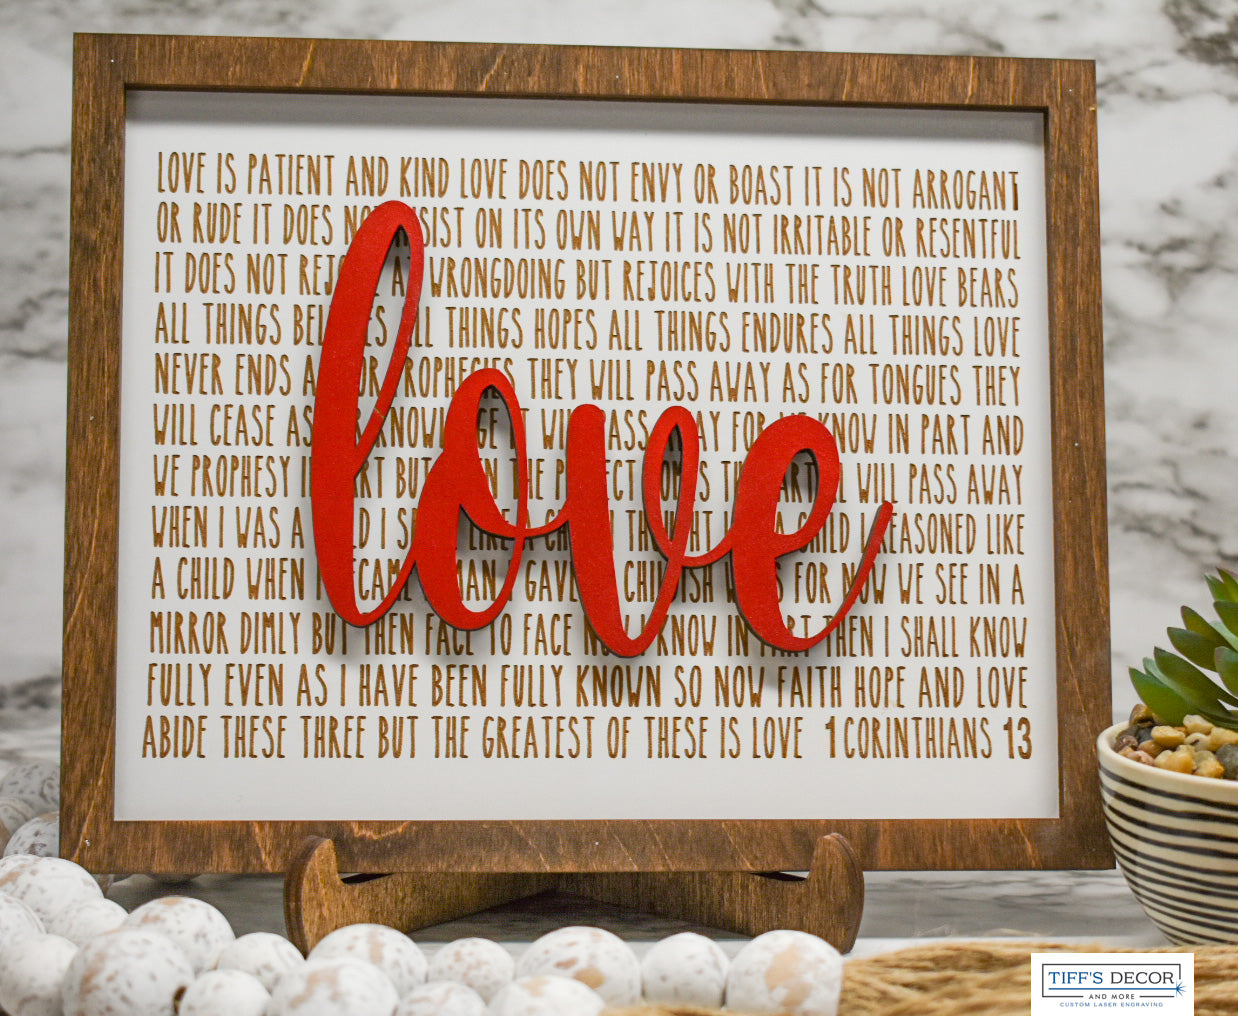 Love sign with handwritten note